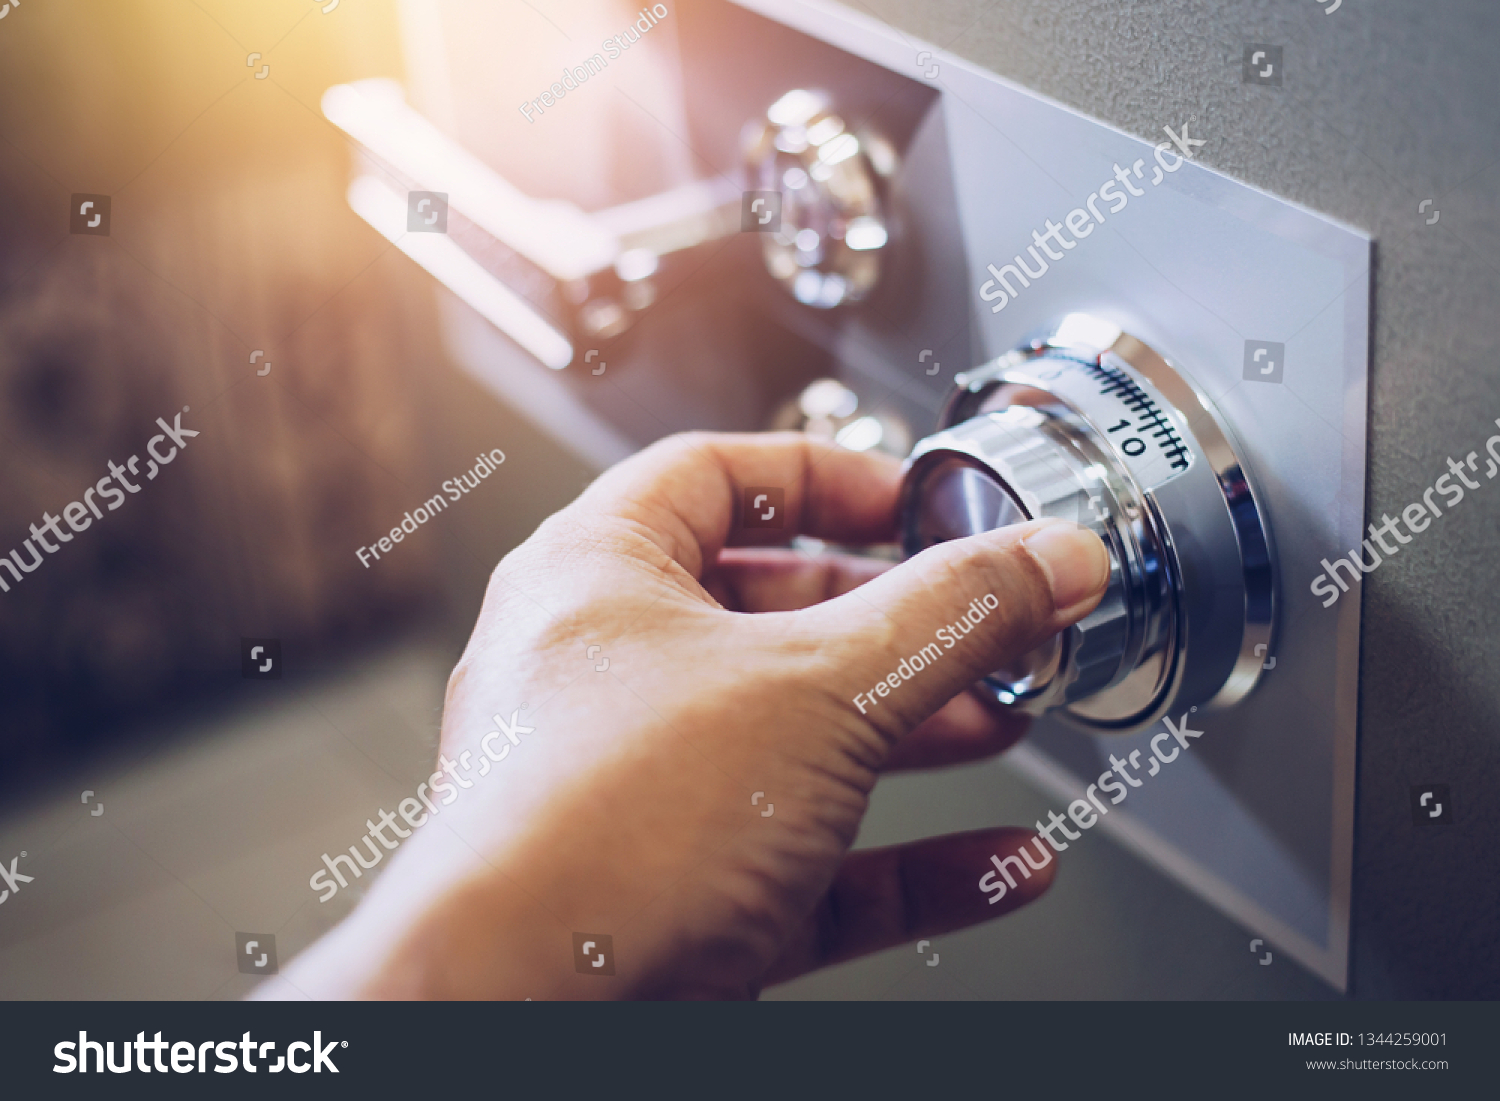 Close up of a man hand hold and tuning on a combinations safe dial lock #1344259001